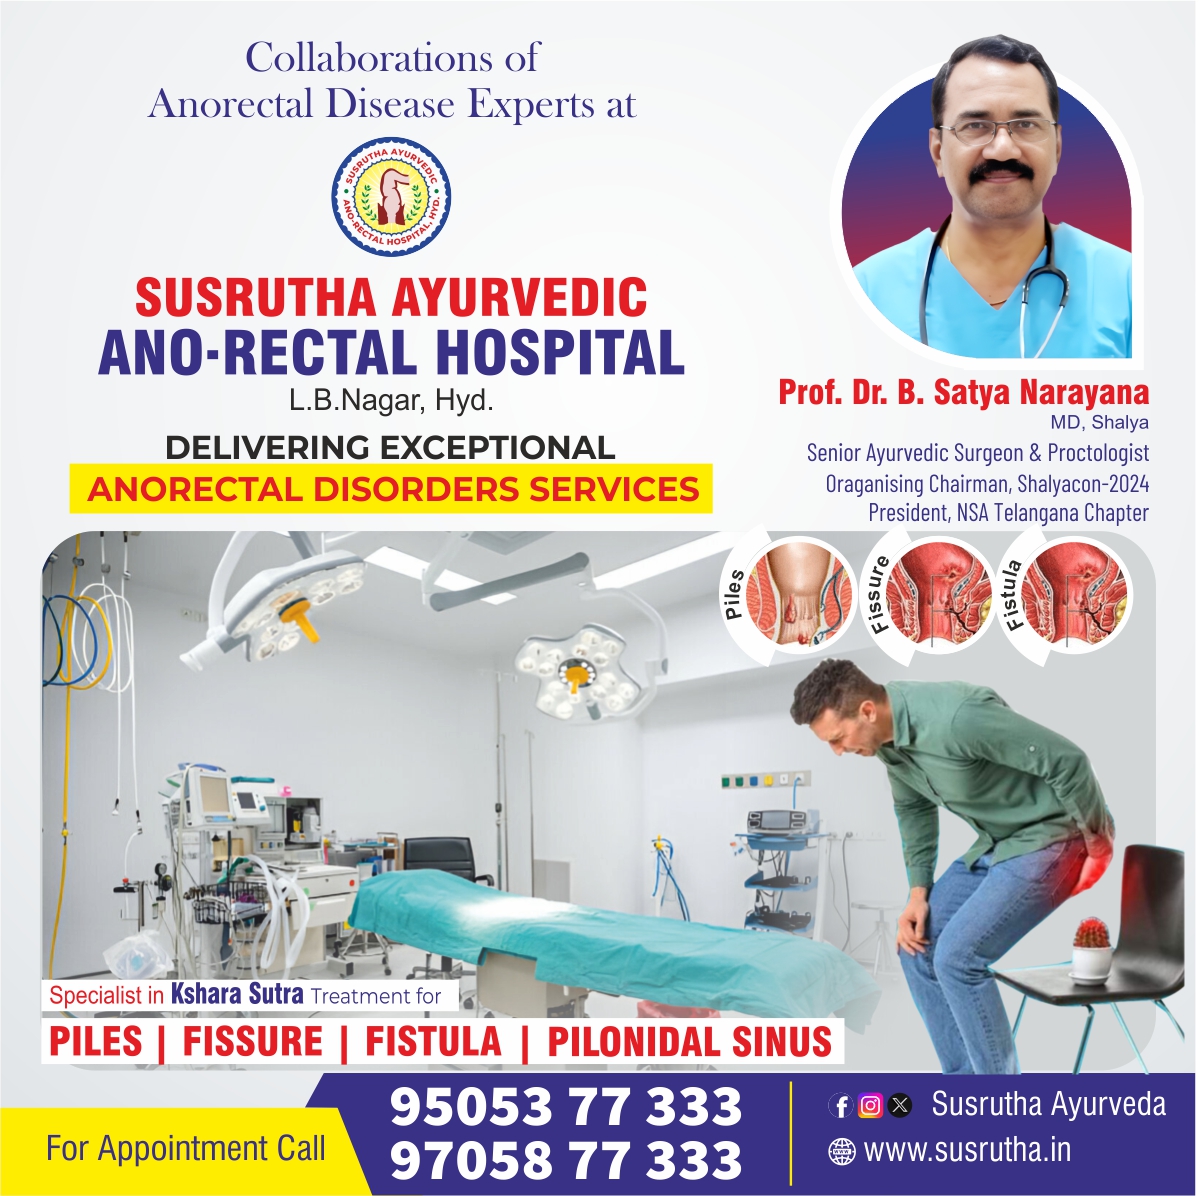 collabration of experts anotectal disease at
Susrutha Ayurvedic Anorectal Hospital
L.B. Nagar, Hyderabad
delivering exceptional Anorectal Disorders Services
#piletreatment  #susrutha #ayurvedicPileshsoptal